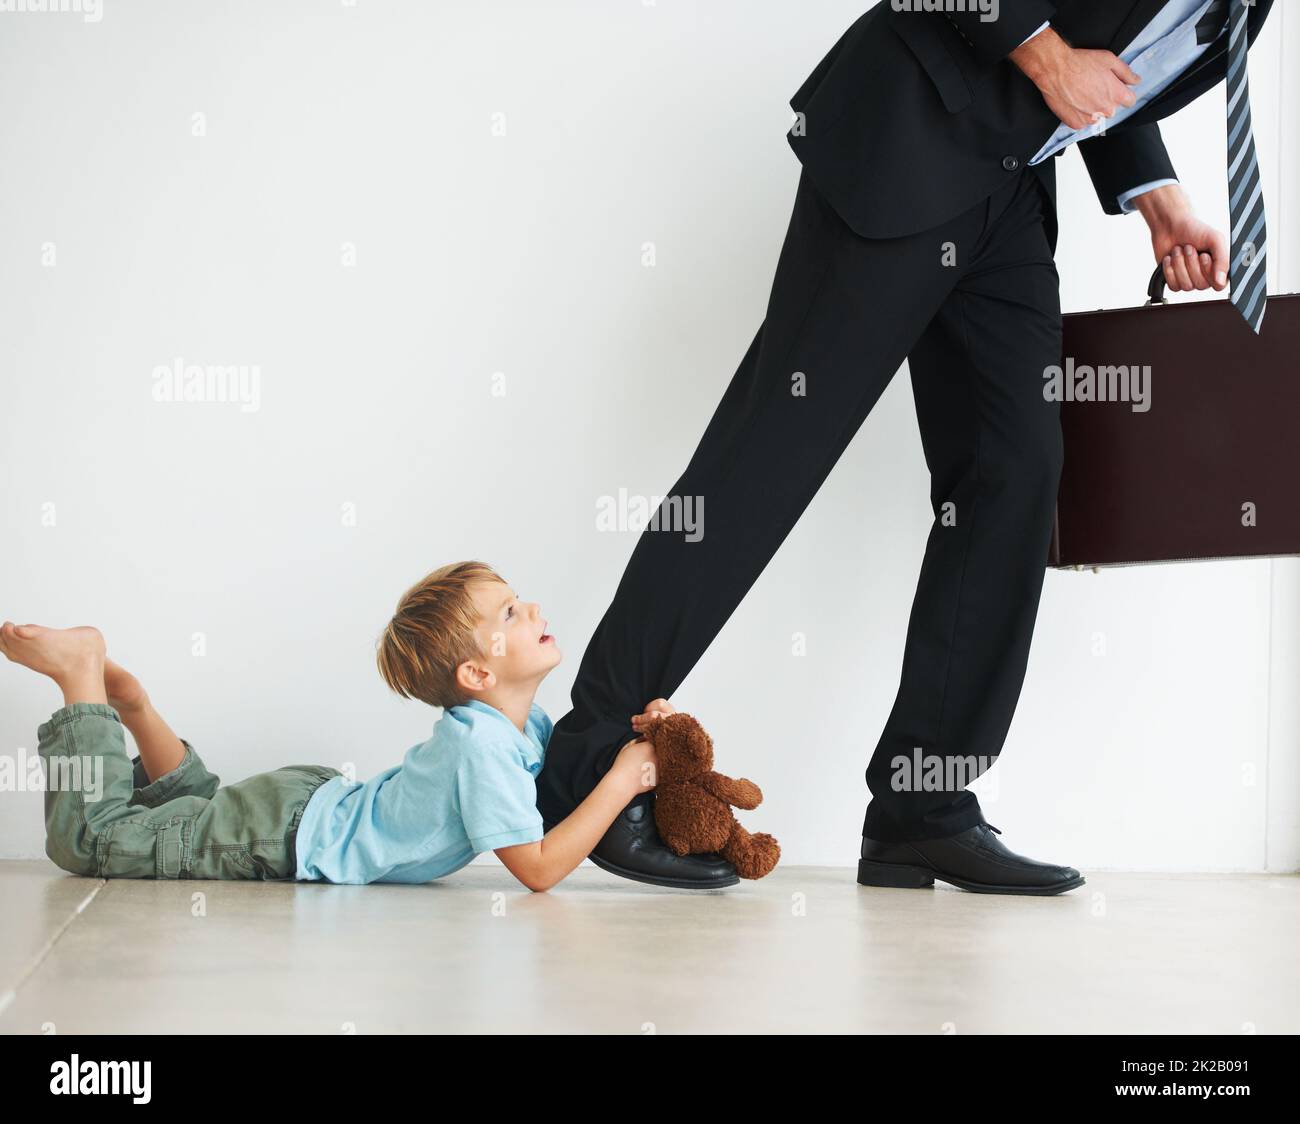 Stay at home with me daddy. A young boy holding onto his dads leg to try and stop him from leaving to work. Stock Photo